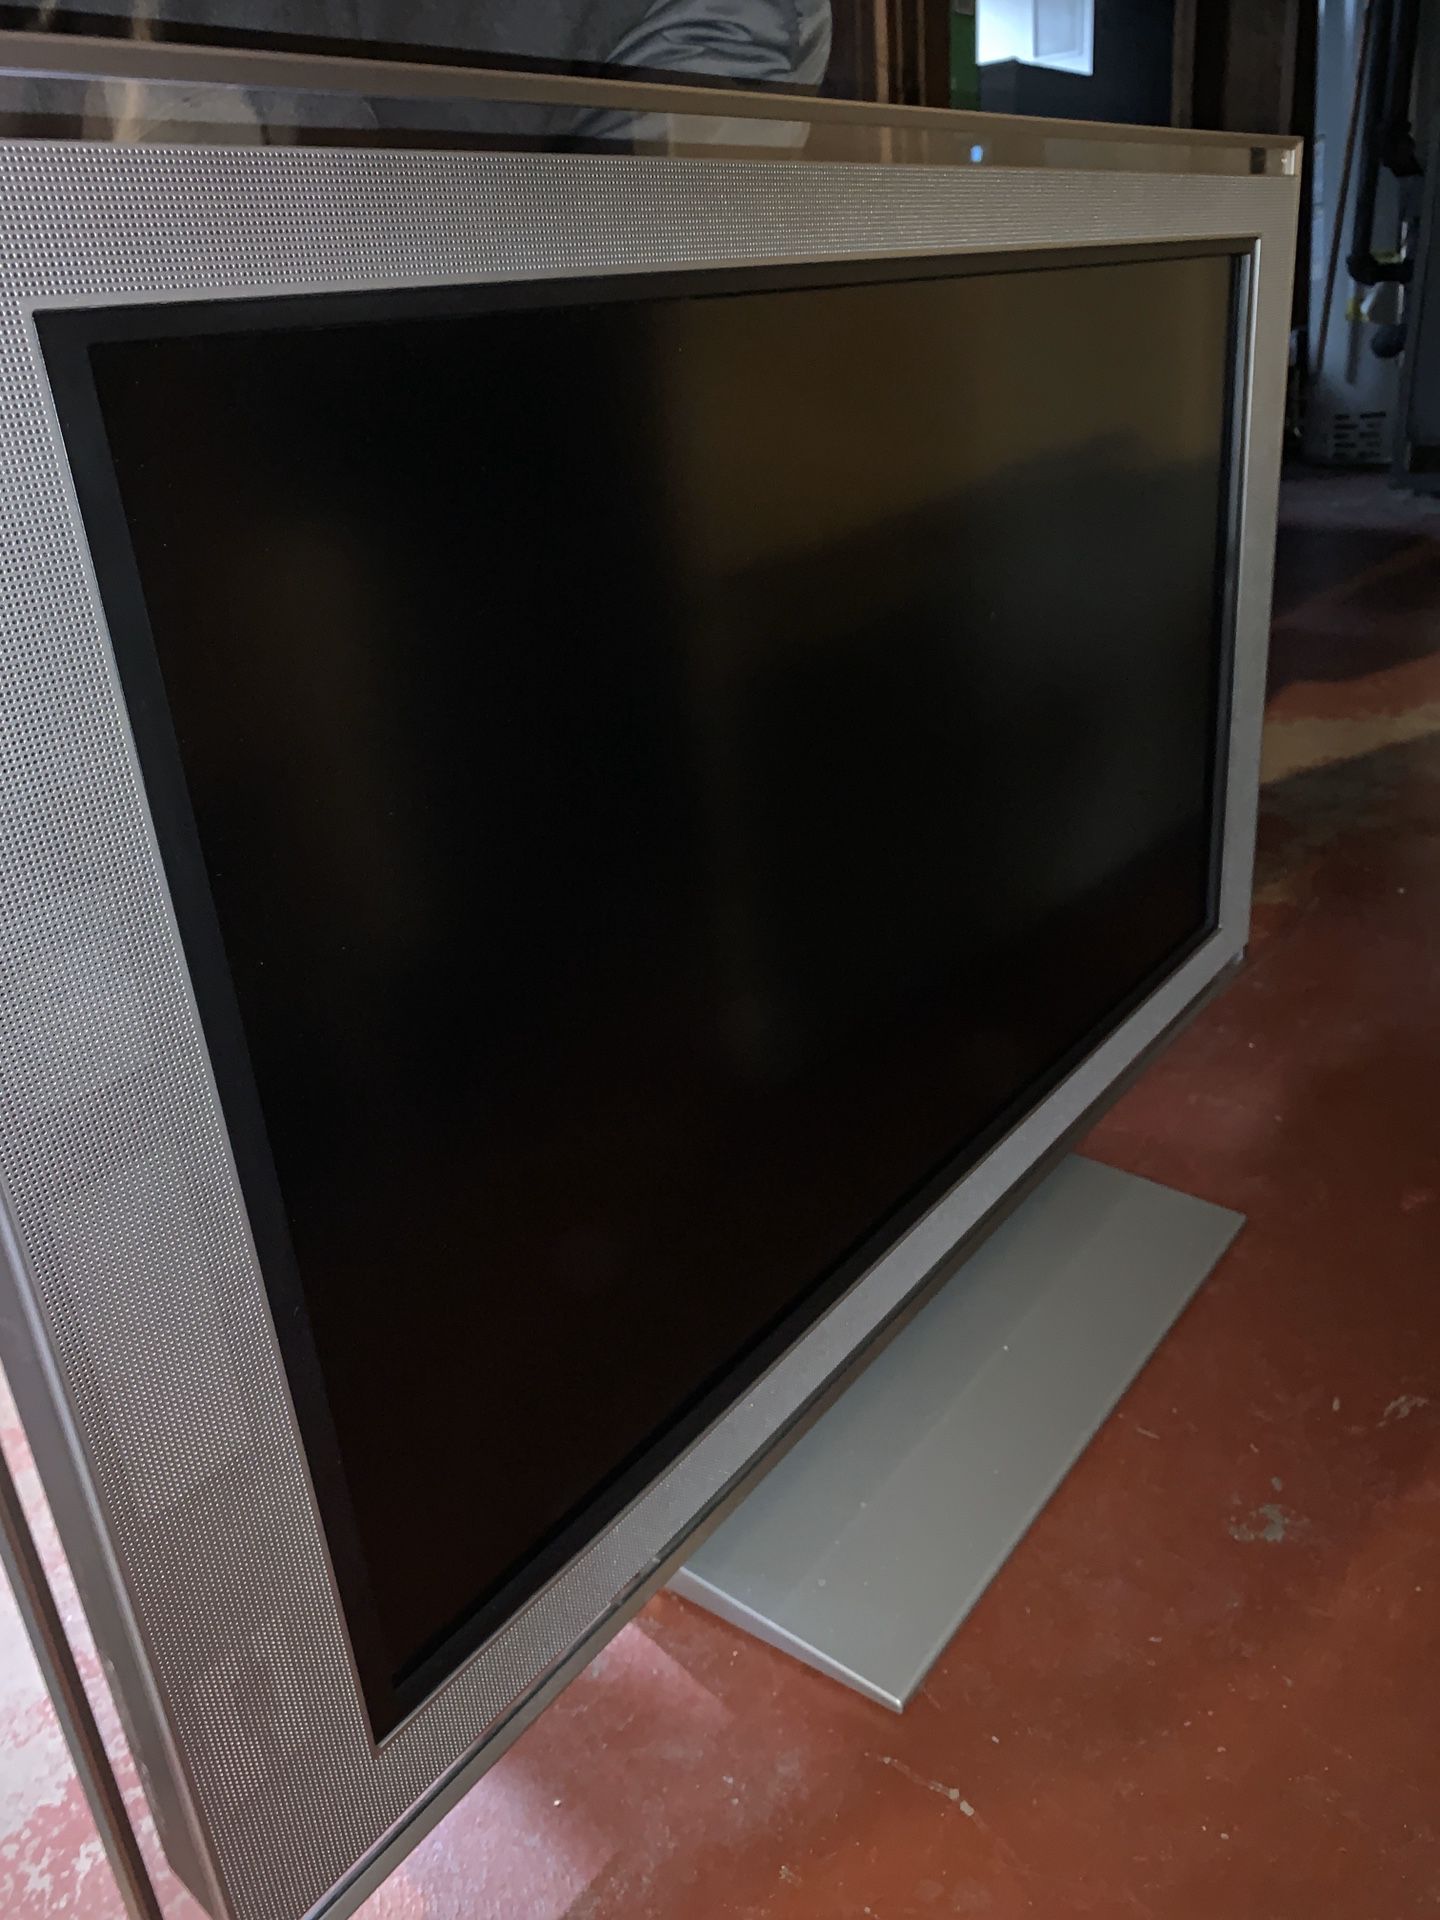 Bravia Sony 40 inch - great condition - pick up only